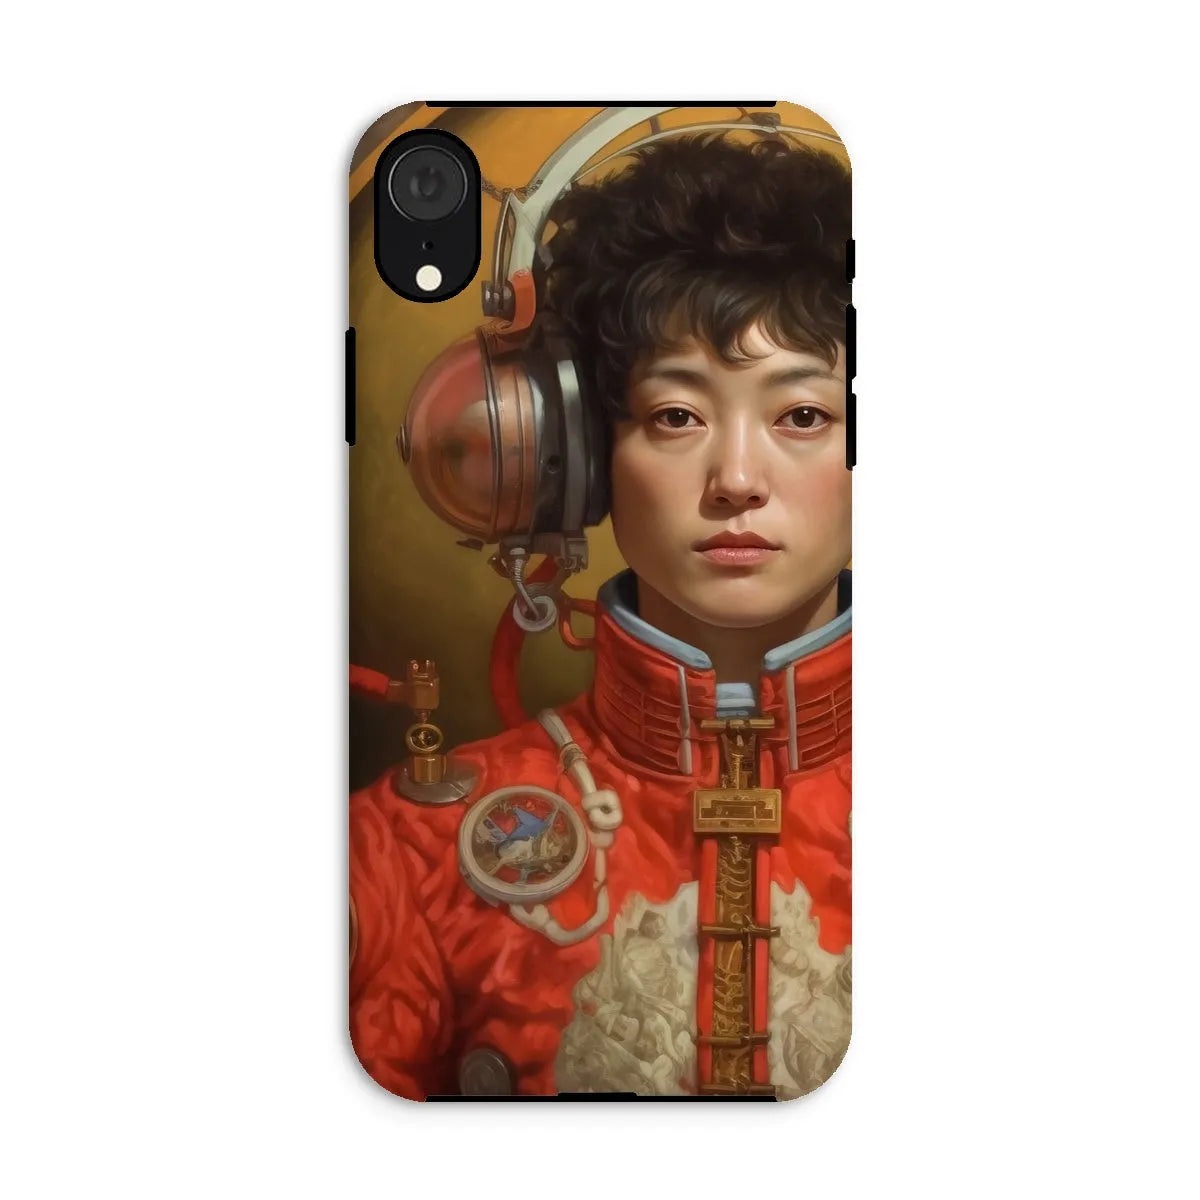 Mùchén - Gay Chinese Astronaut Aesthetic Phone Case - Iphone Xr / Matte - Mobile Phone Cases - Aesthetic Art